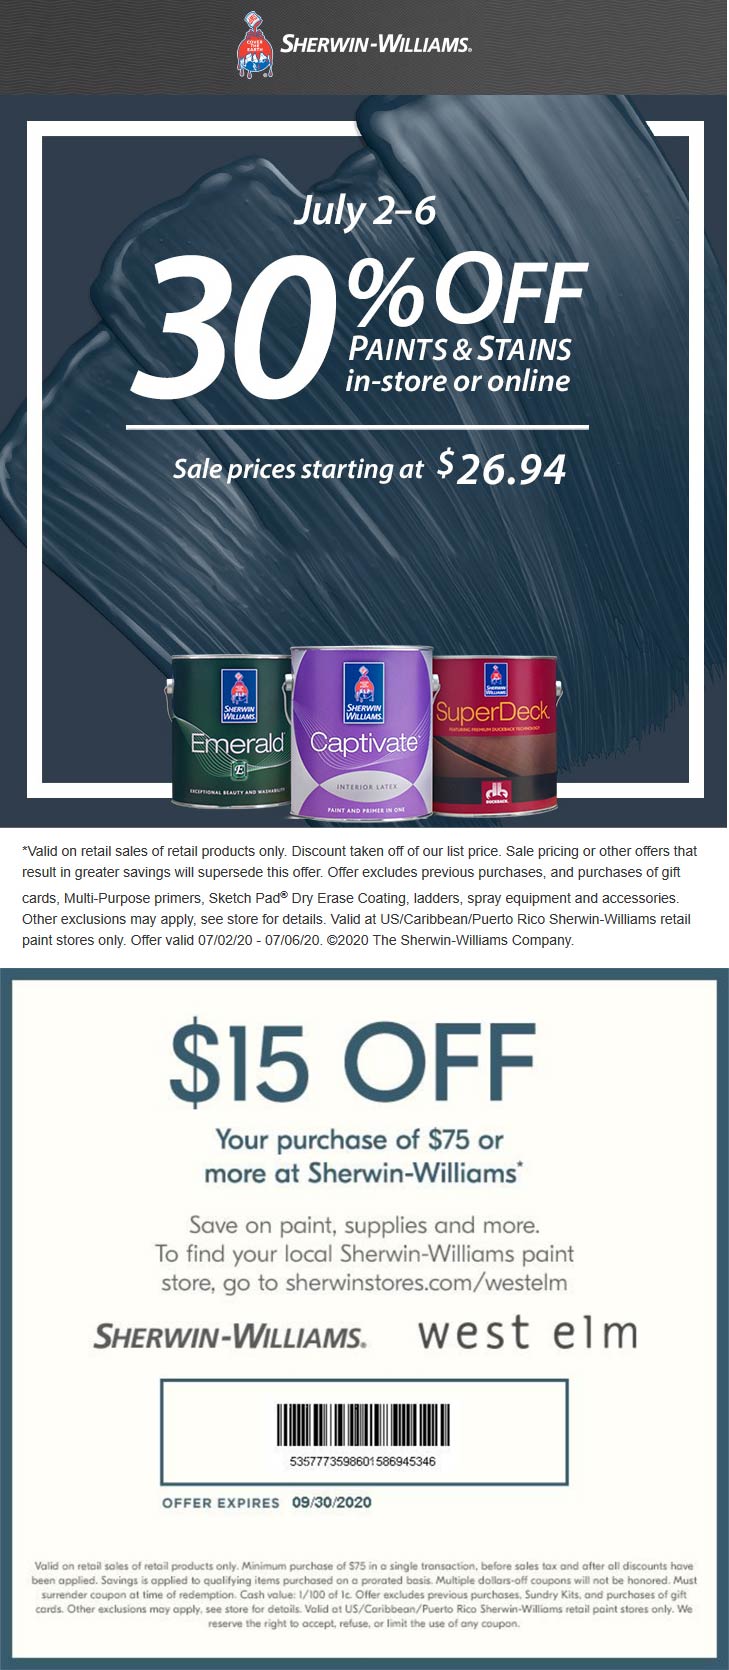 Sherwin Williams stores Coupon  30% off paints & stains at Sherwin Williams, ditto online #sherwinwilliams